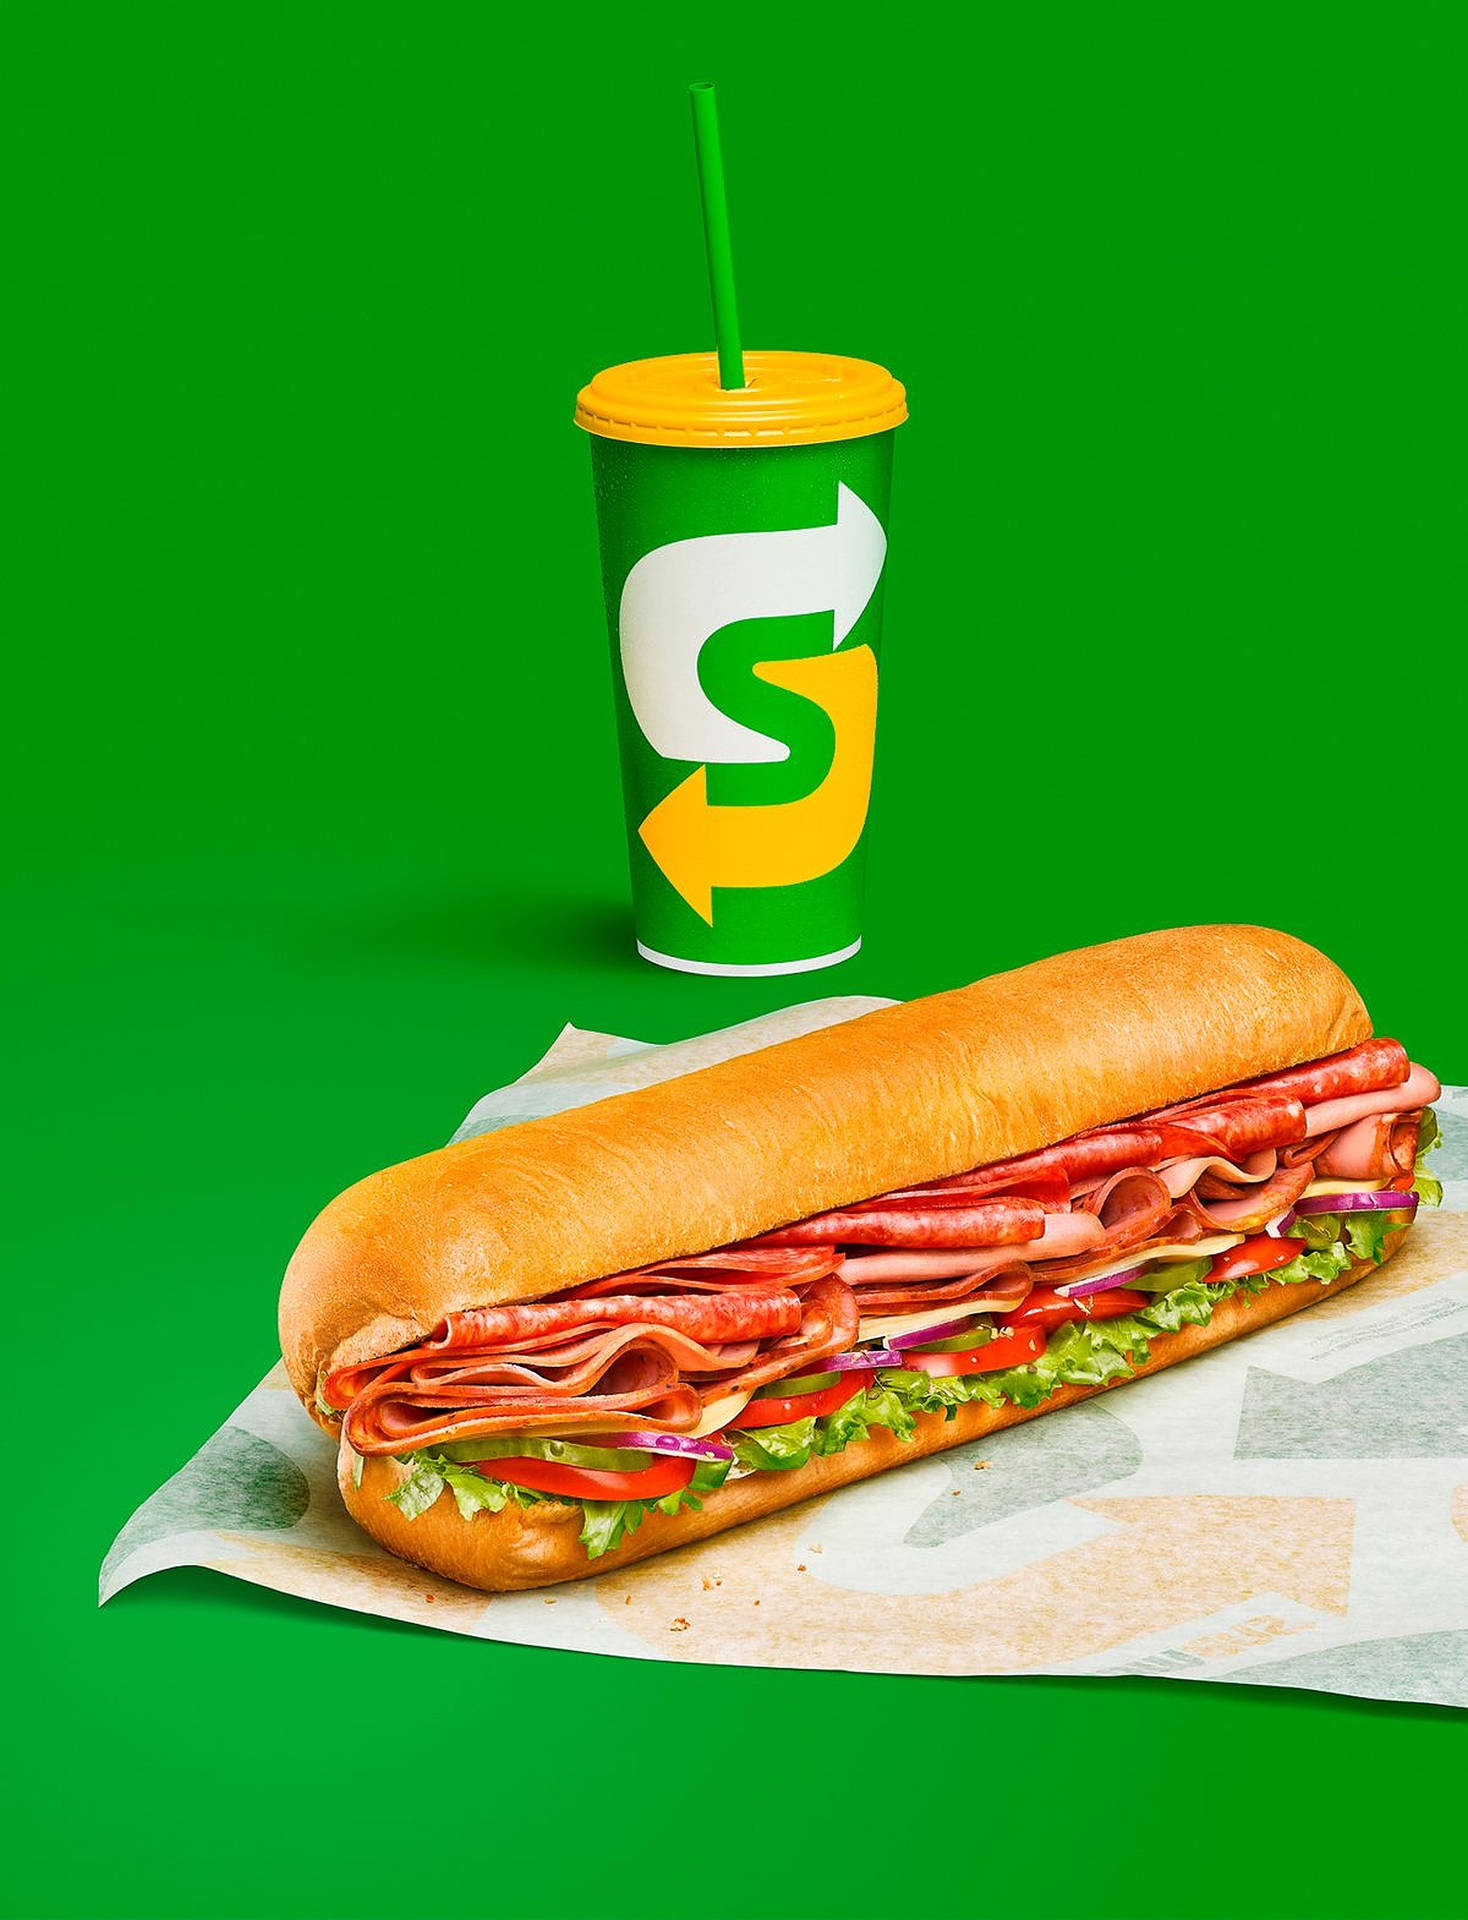 Download Subway Sandwich And Drink Wallpaper